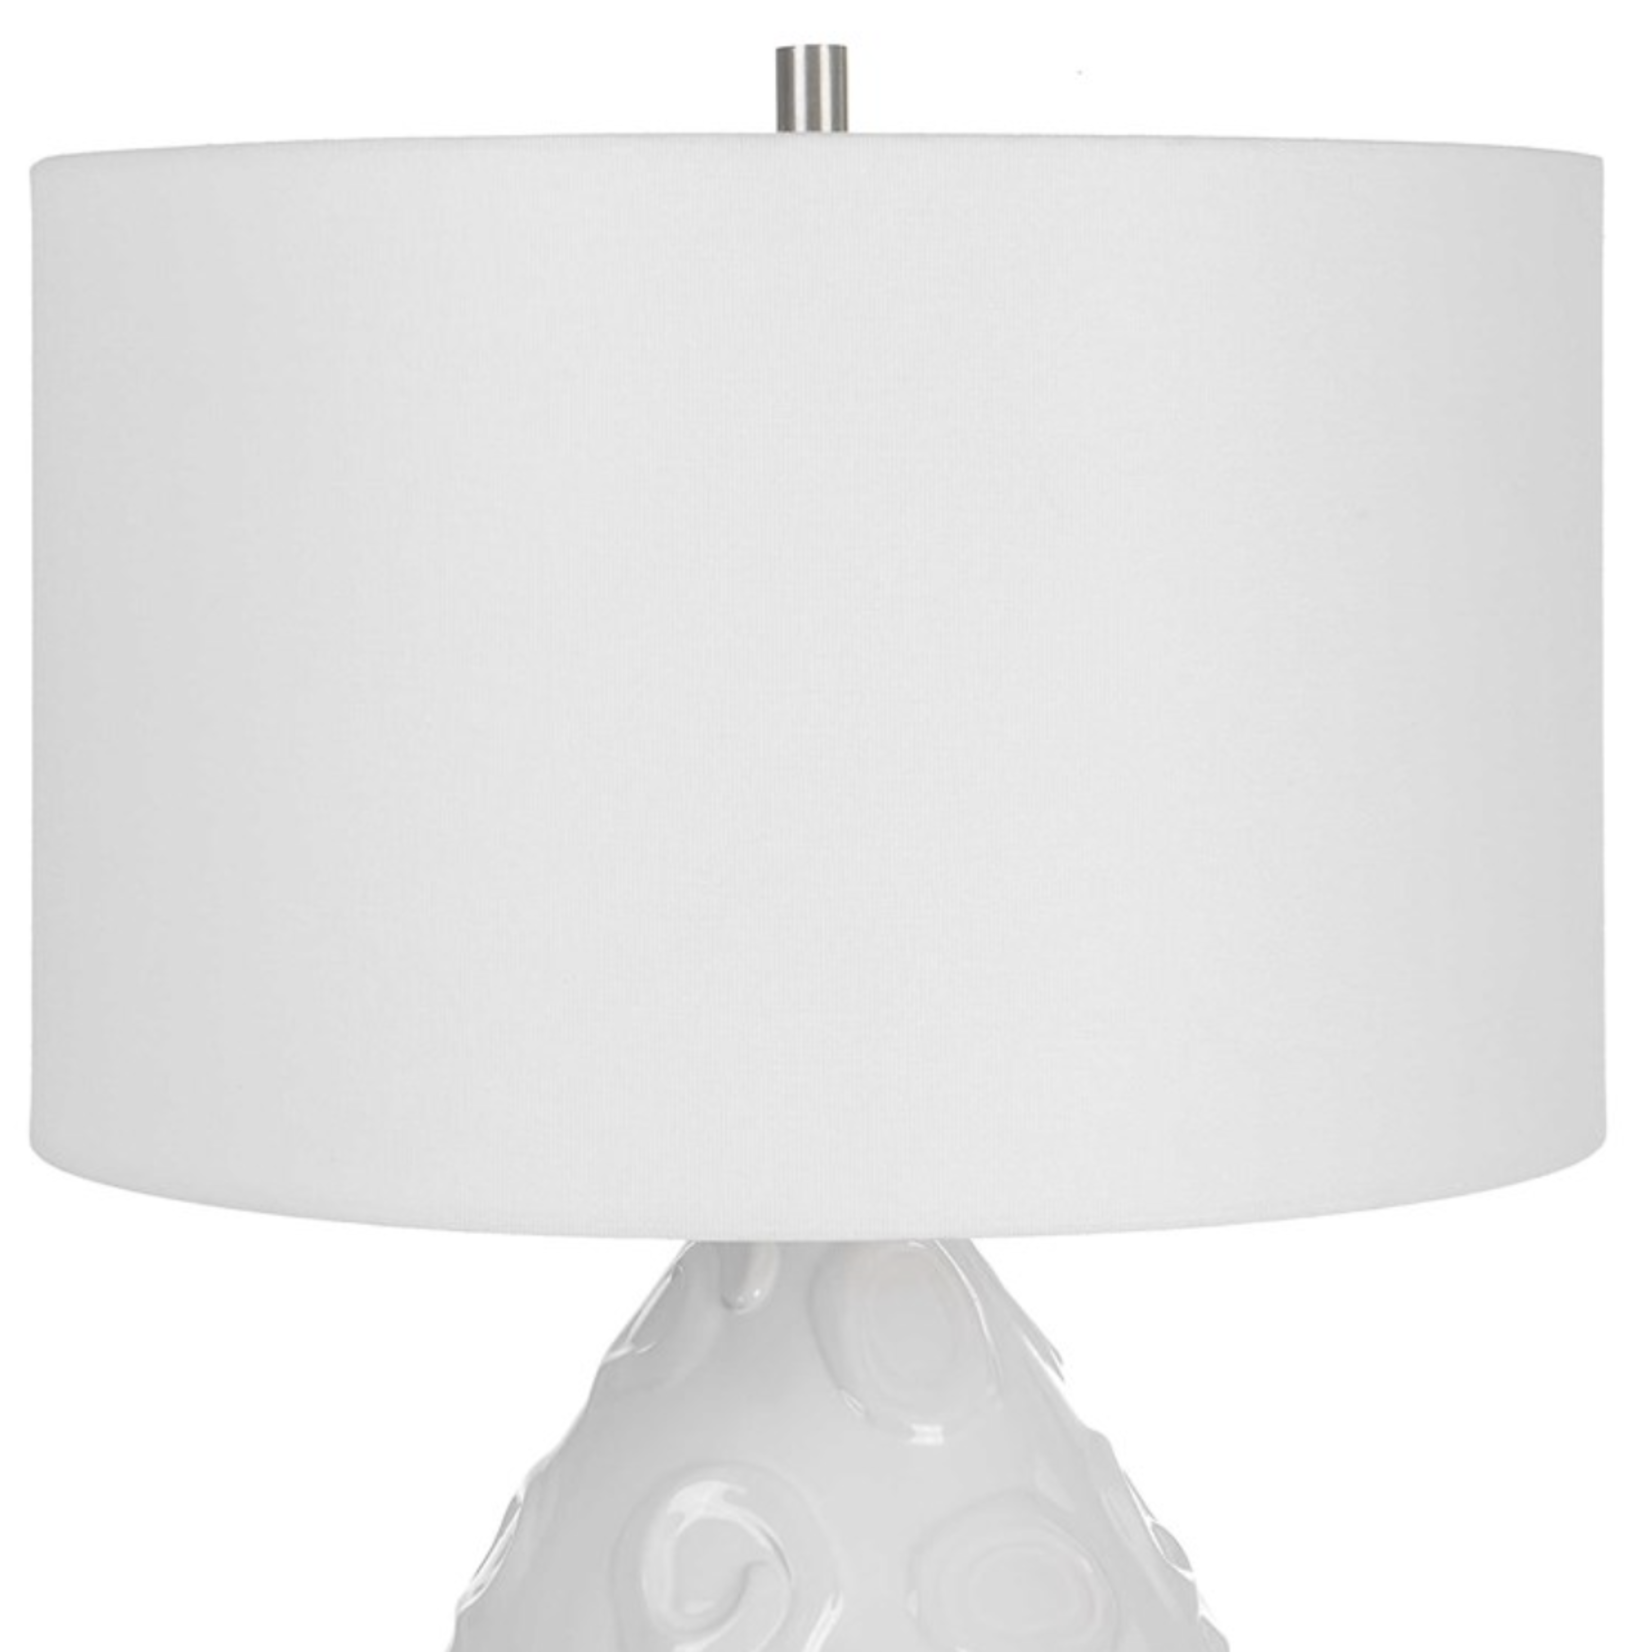 Outside The Box 25" Uttermost Loop Handcrafted Glazed White Ceramic Table Lamp